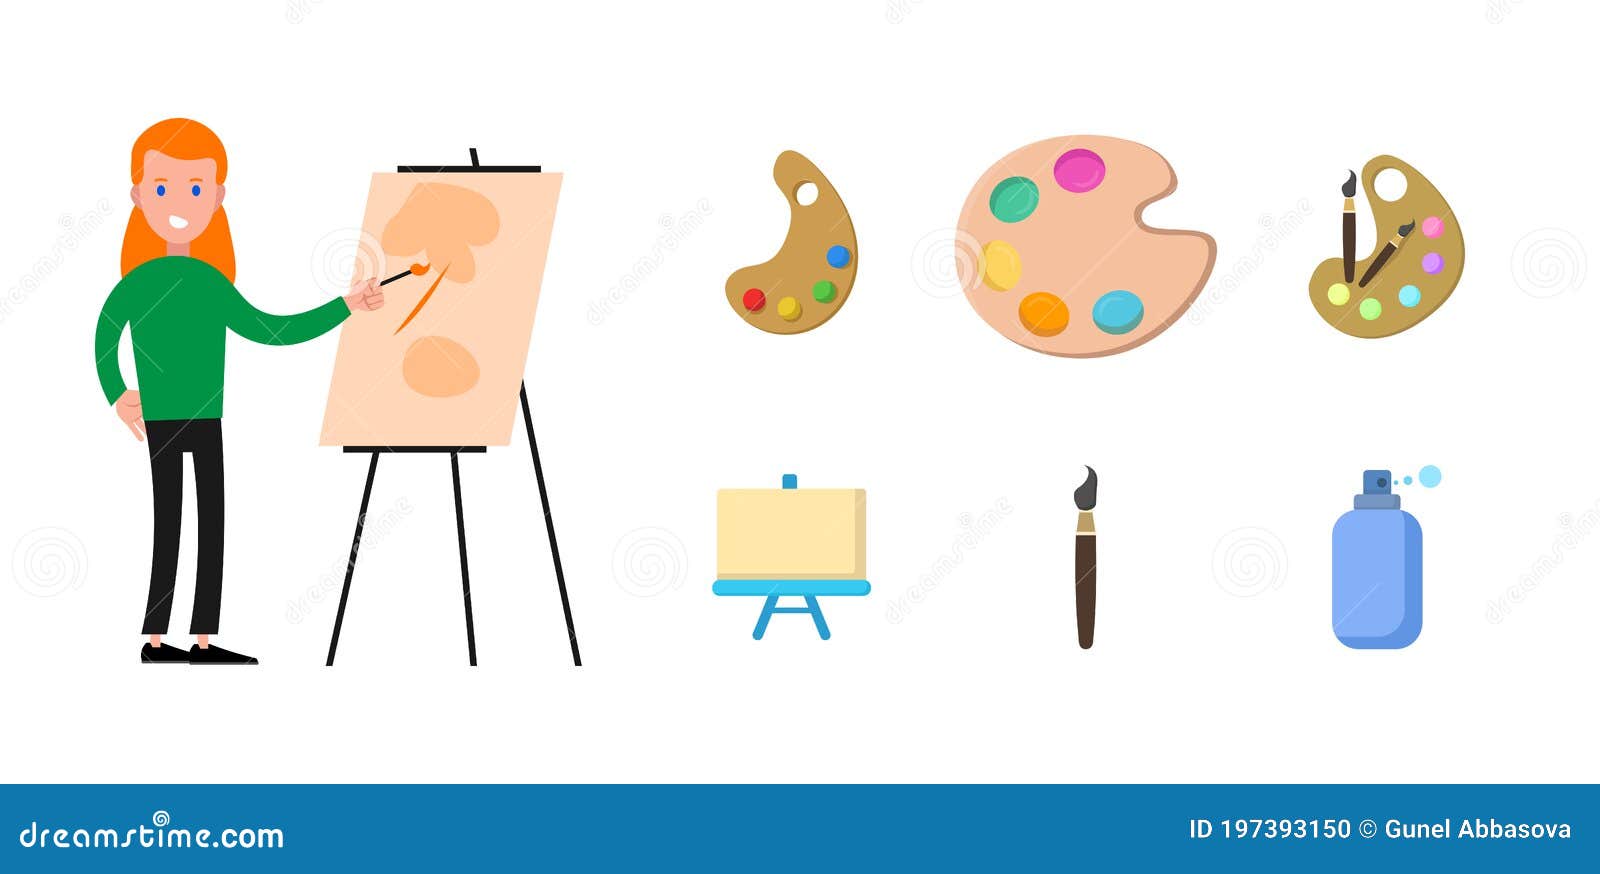 vector set of art materials, drawn by wayercolor, palette